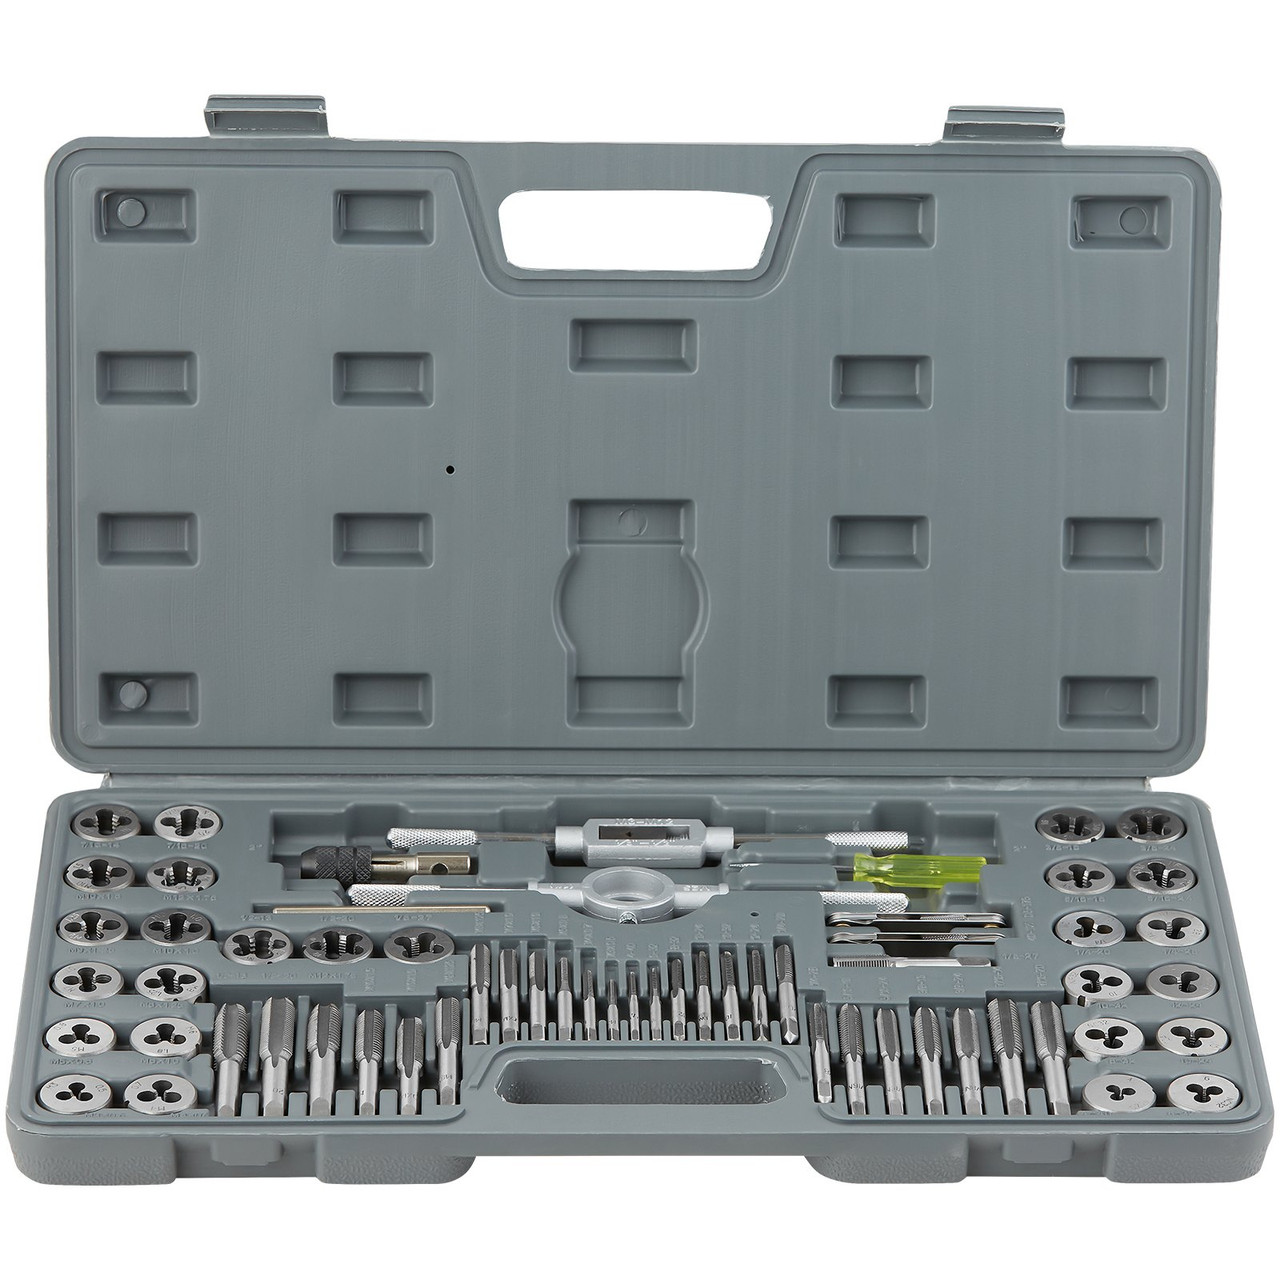 VEVOR Tap and Die Set, 60-Piece Metric and SAE Standard, Bearing Steel Taps and Dies, Essential Threading Tool for Cutting External Internal Threads, with Complete Accessories and Storage Case